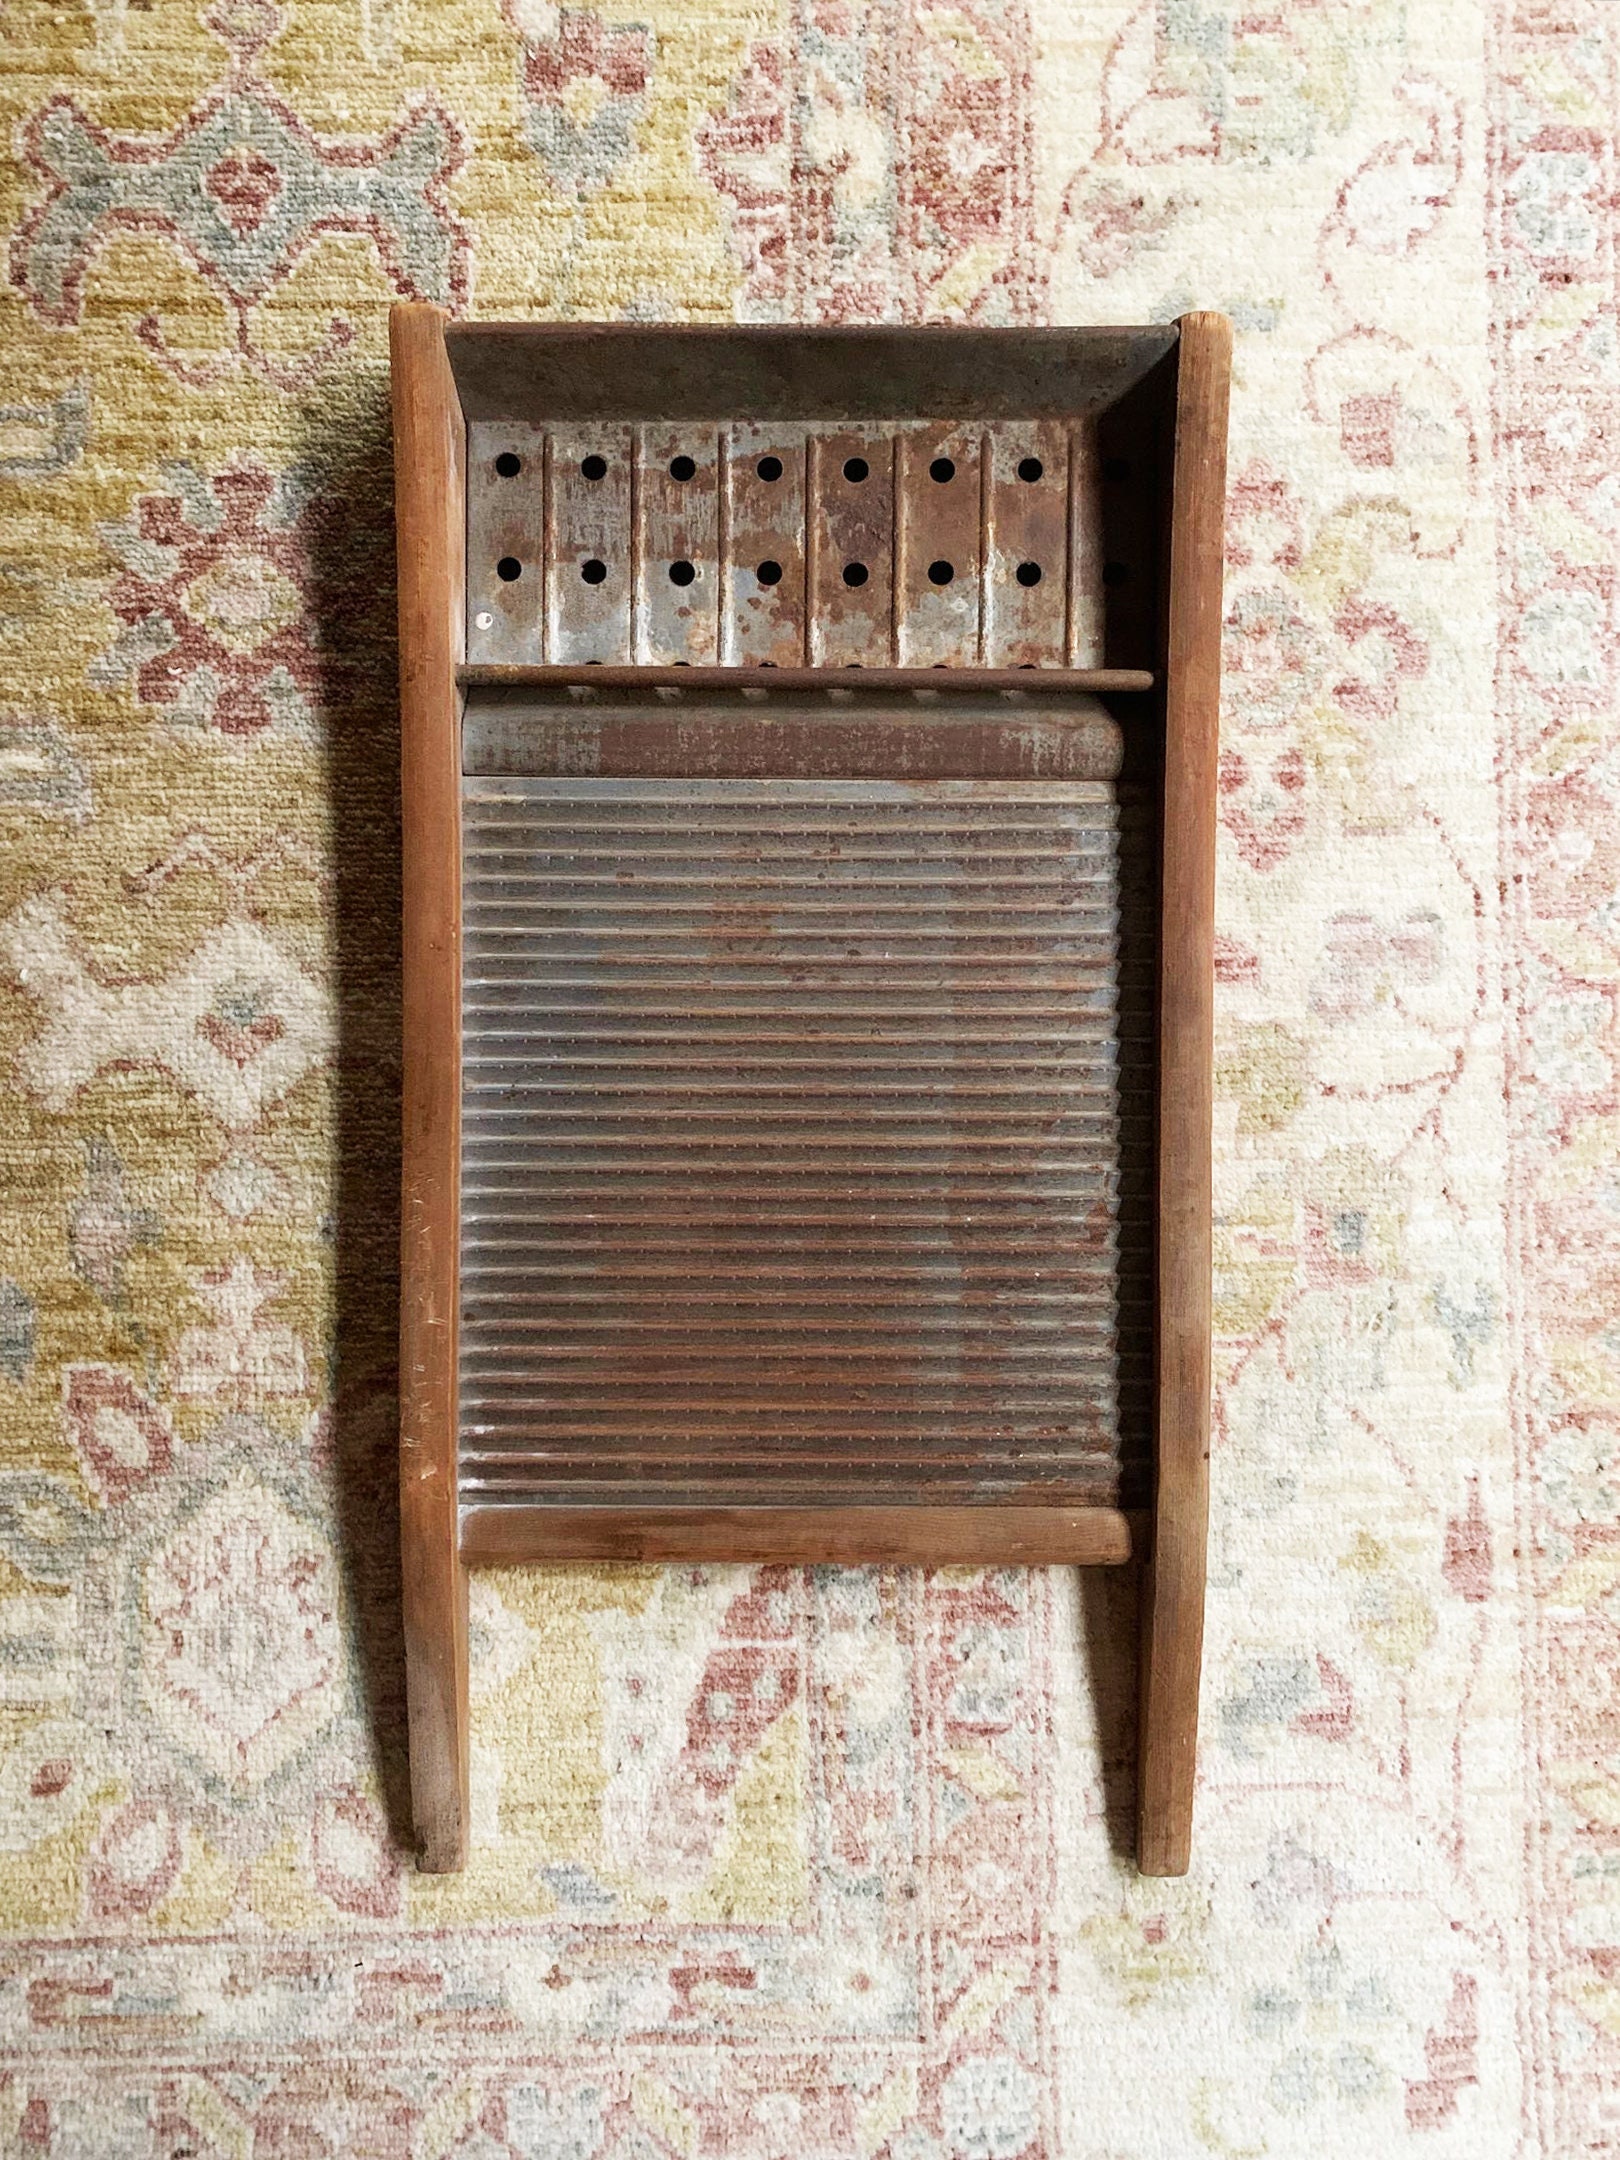 Vintage SMALL DURO WASHBOARD, 16 Inch Galvanized Washboard, Farmhouse  Country Decor, Laundry Decor Rustic Antique,bluegrass Instrument 